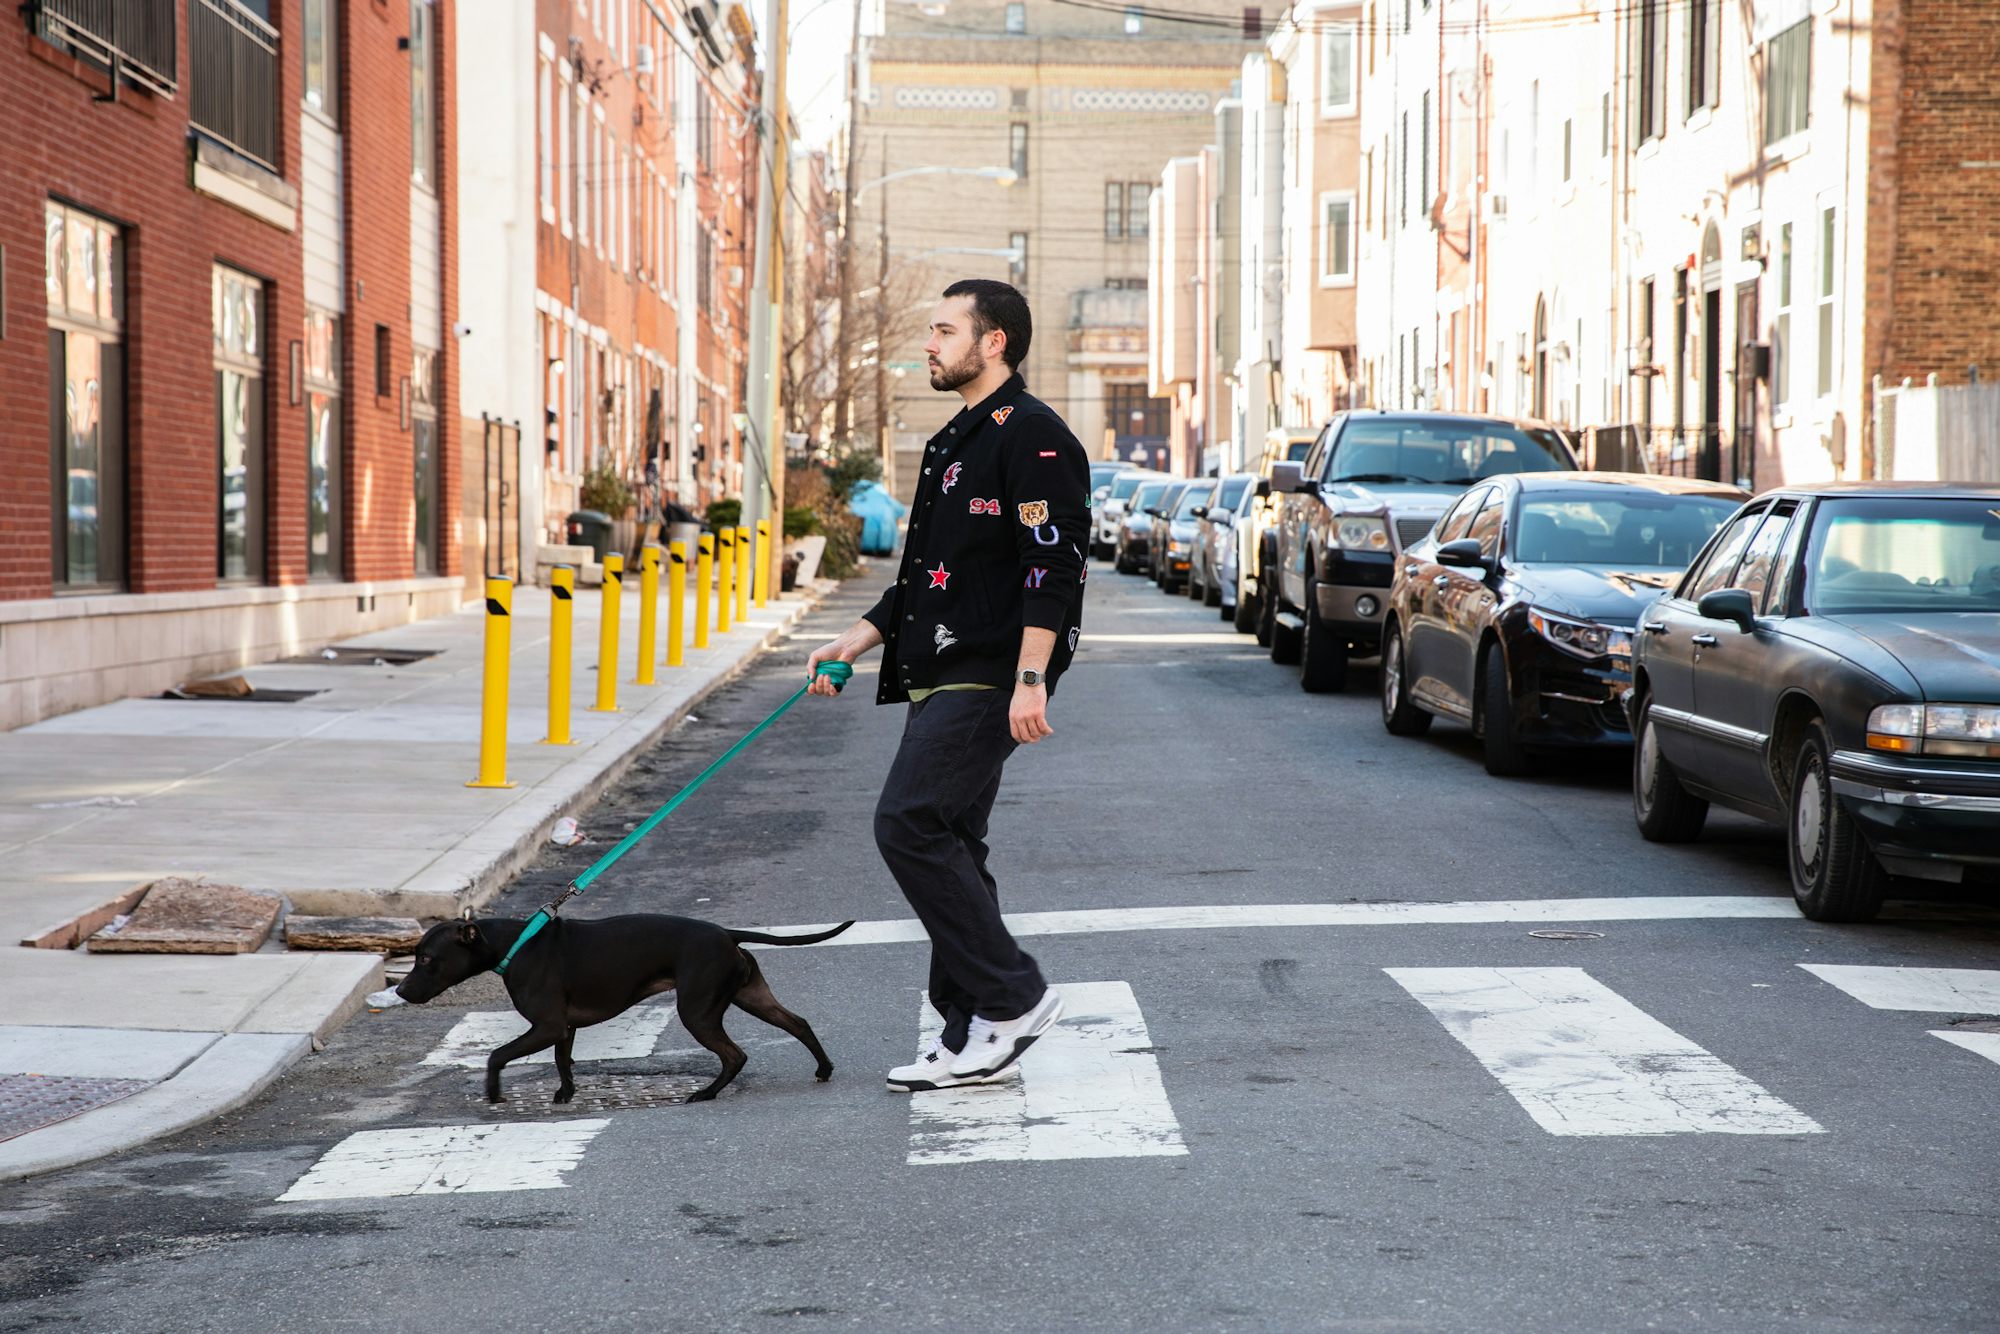 A man and a dog crossing a street